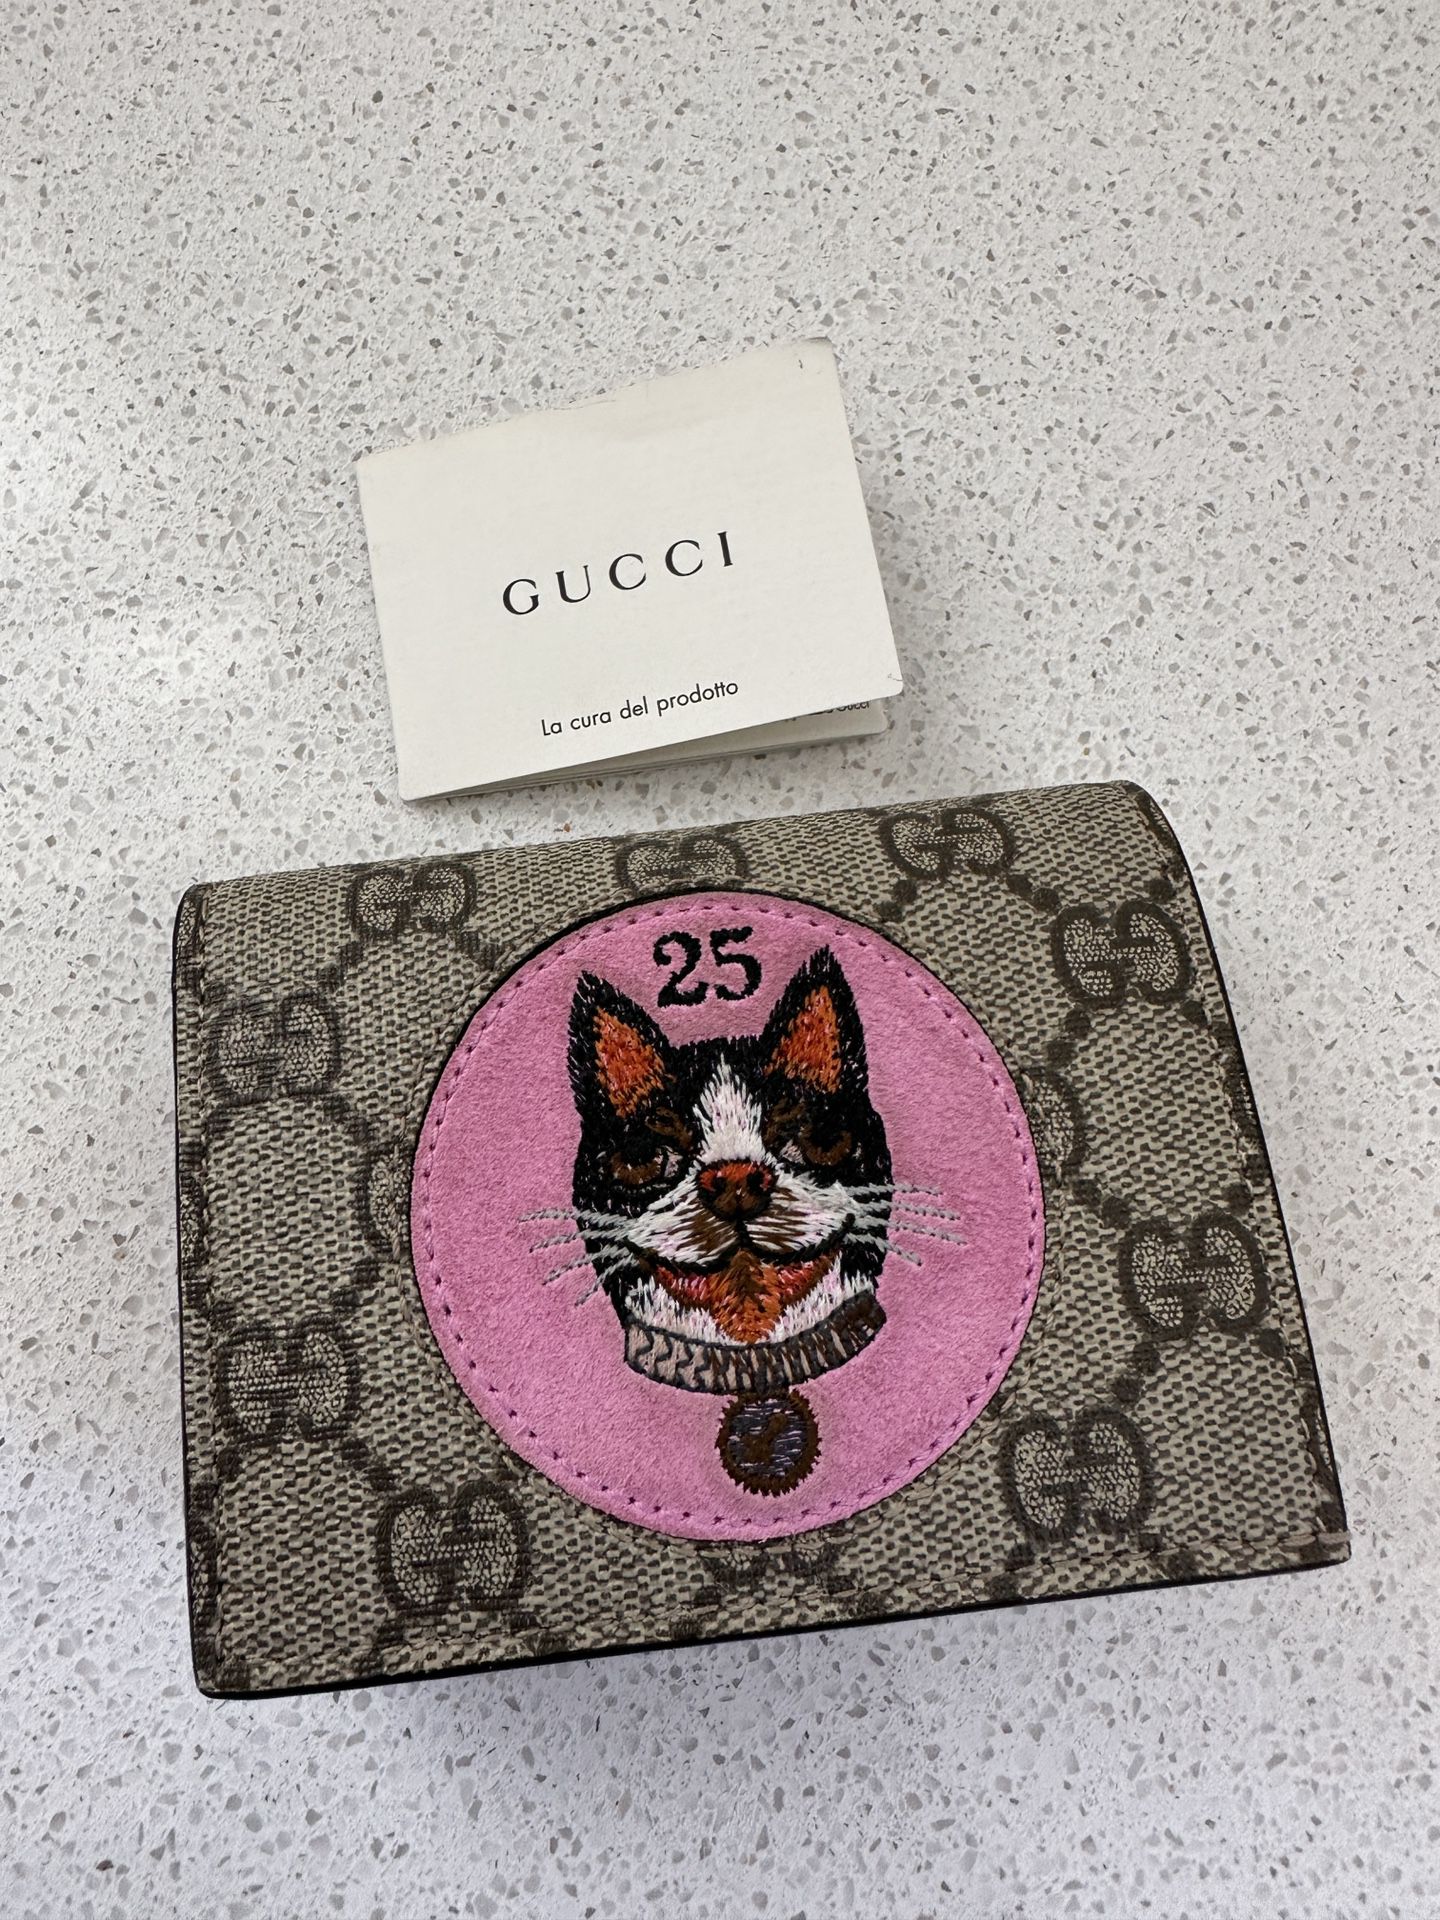 NIB Gucci GG Supreme Card Case Wallet with Bosco Patch Made in Italy